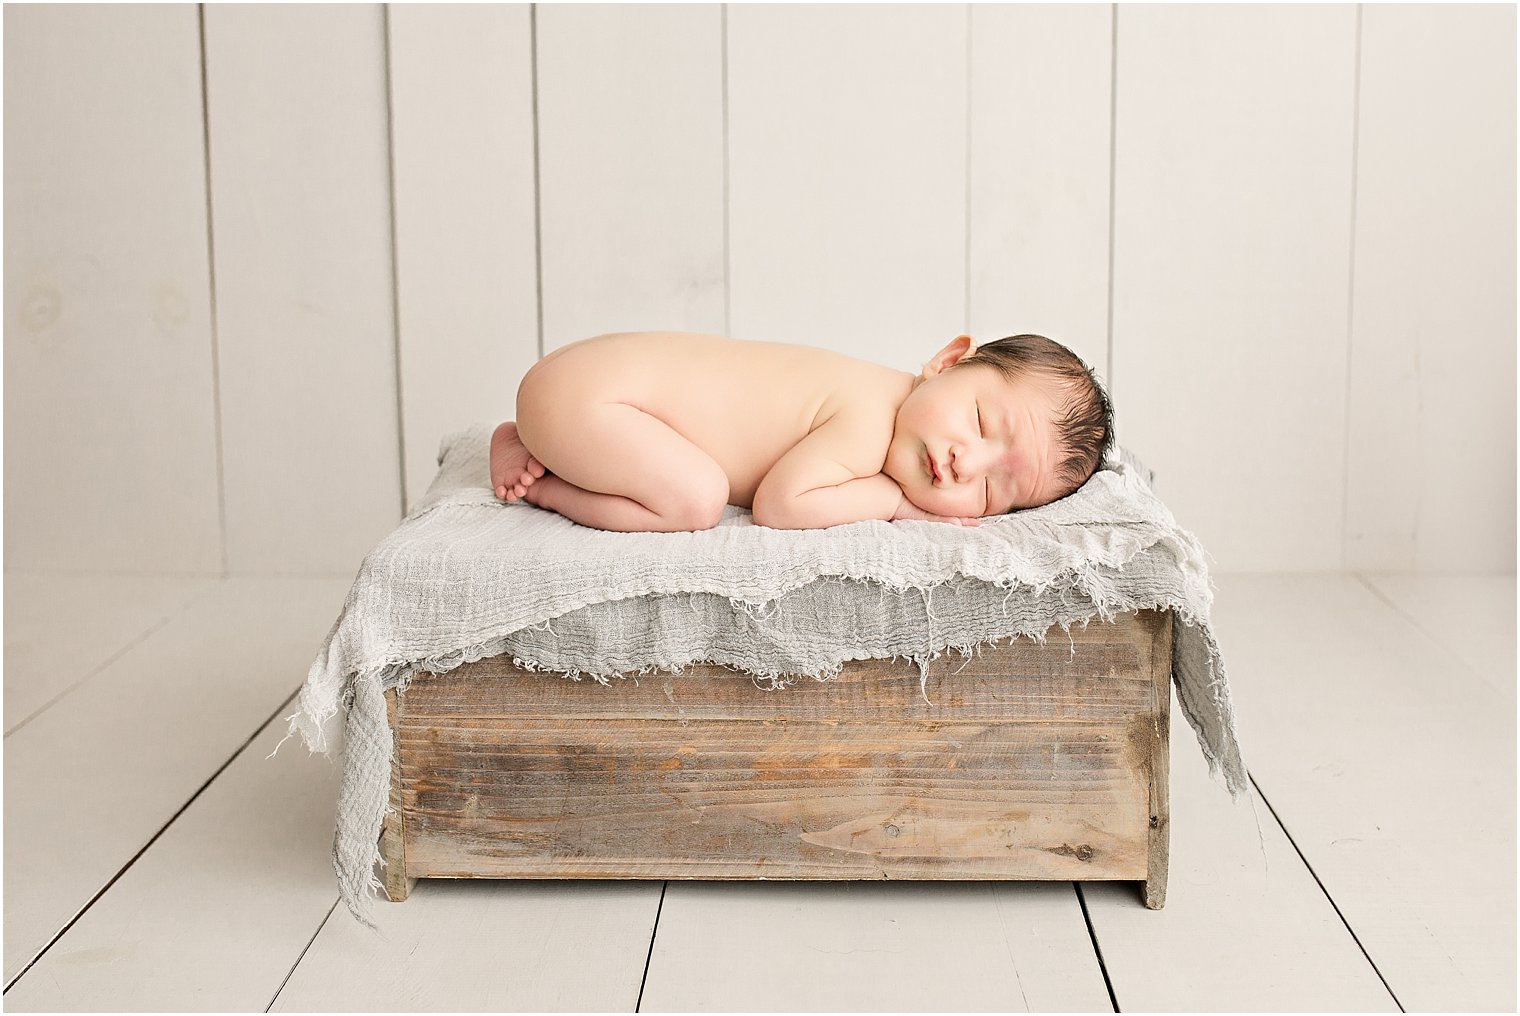 Baby boy on wooden crate